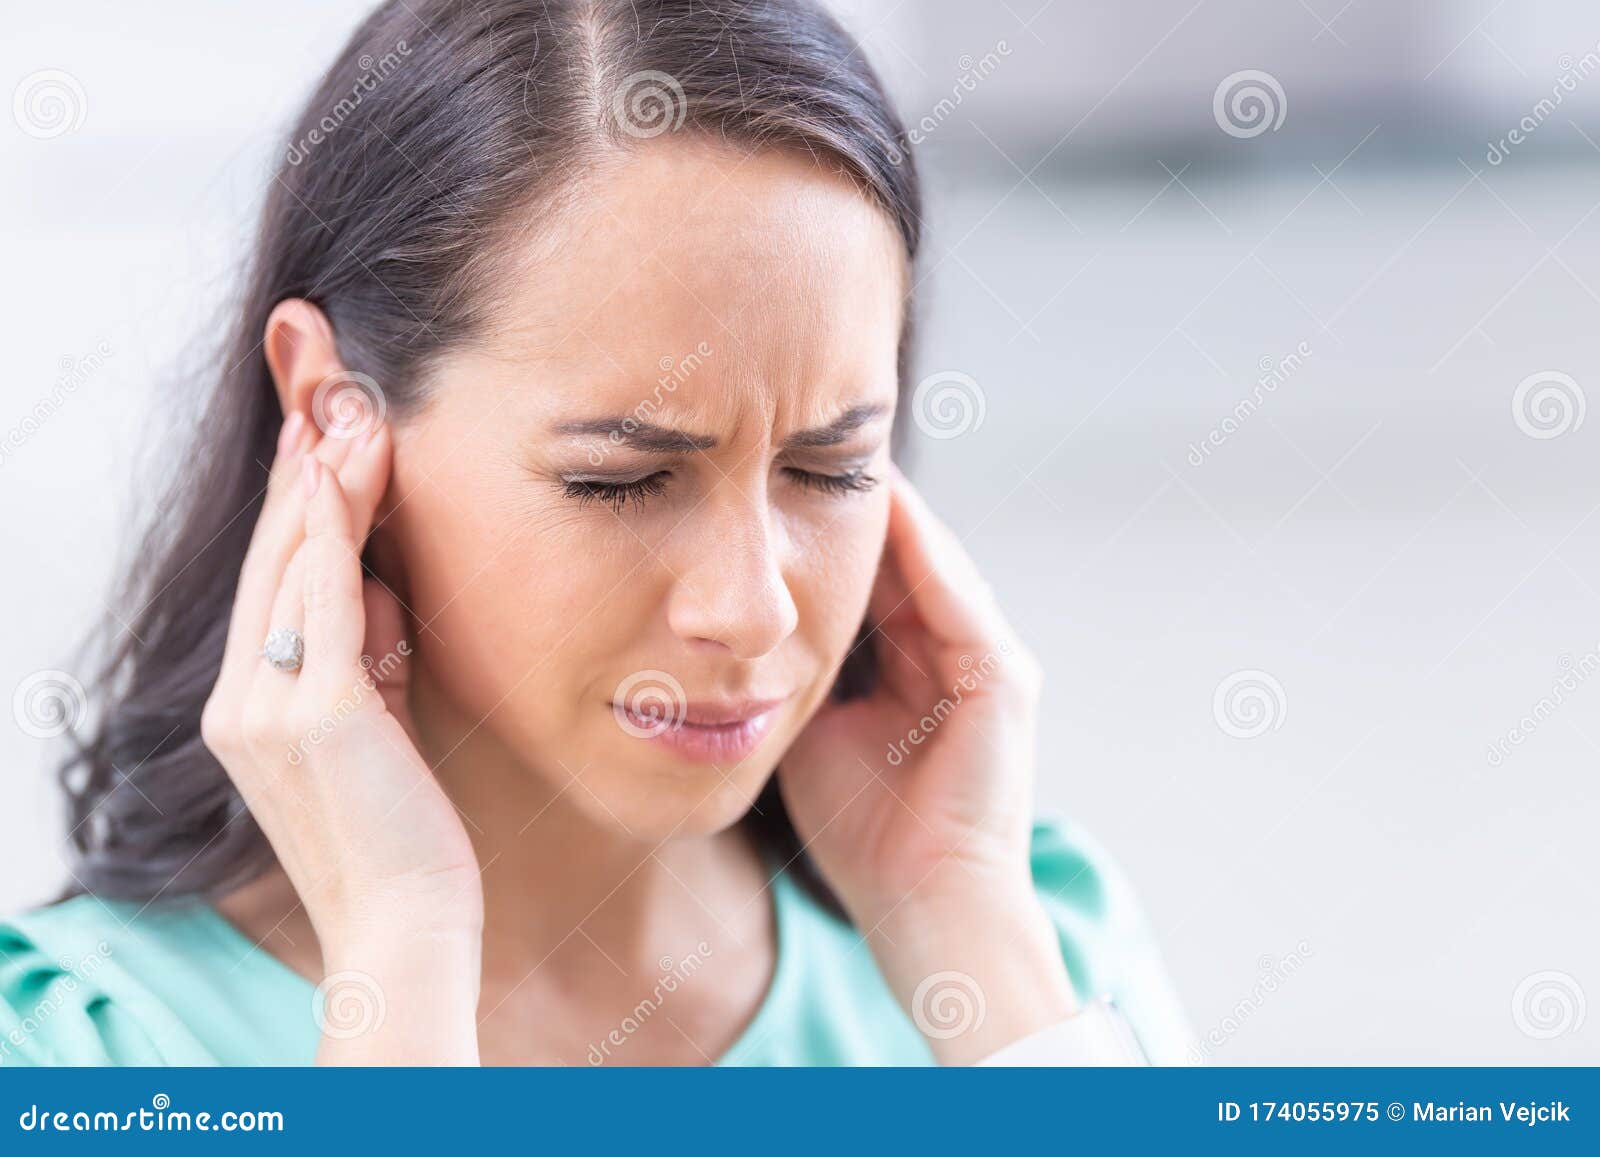 young woman have headache migraine stress or tinnitus - noise whistling in her ears